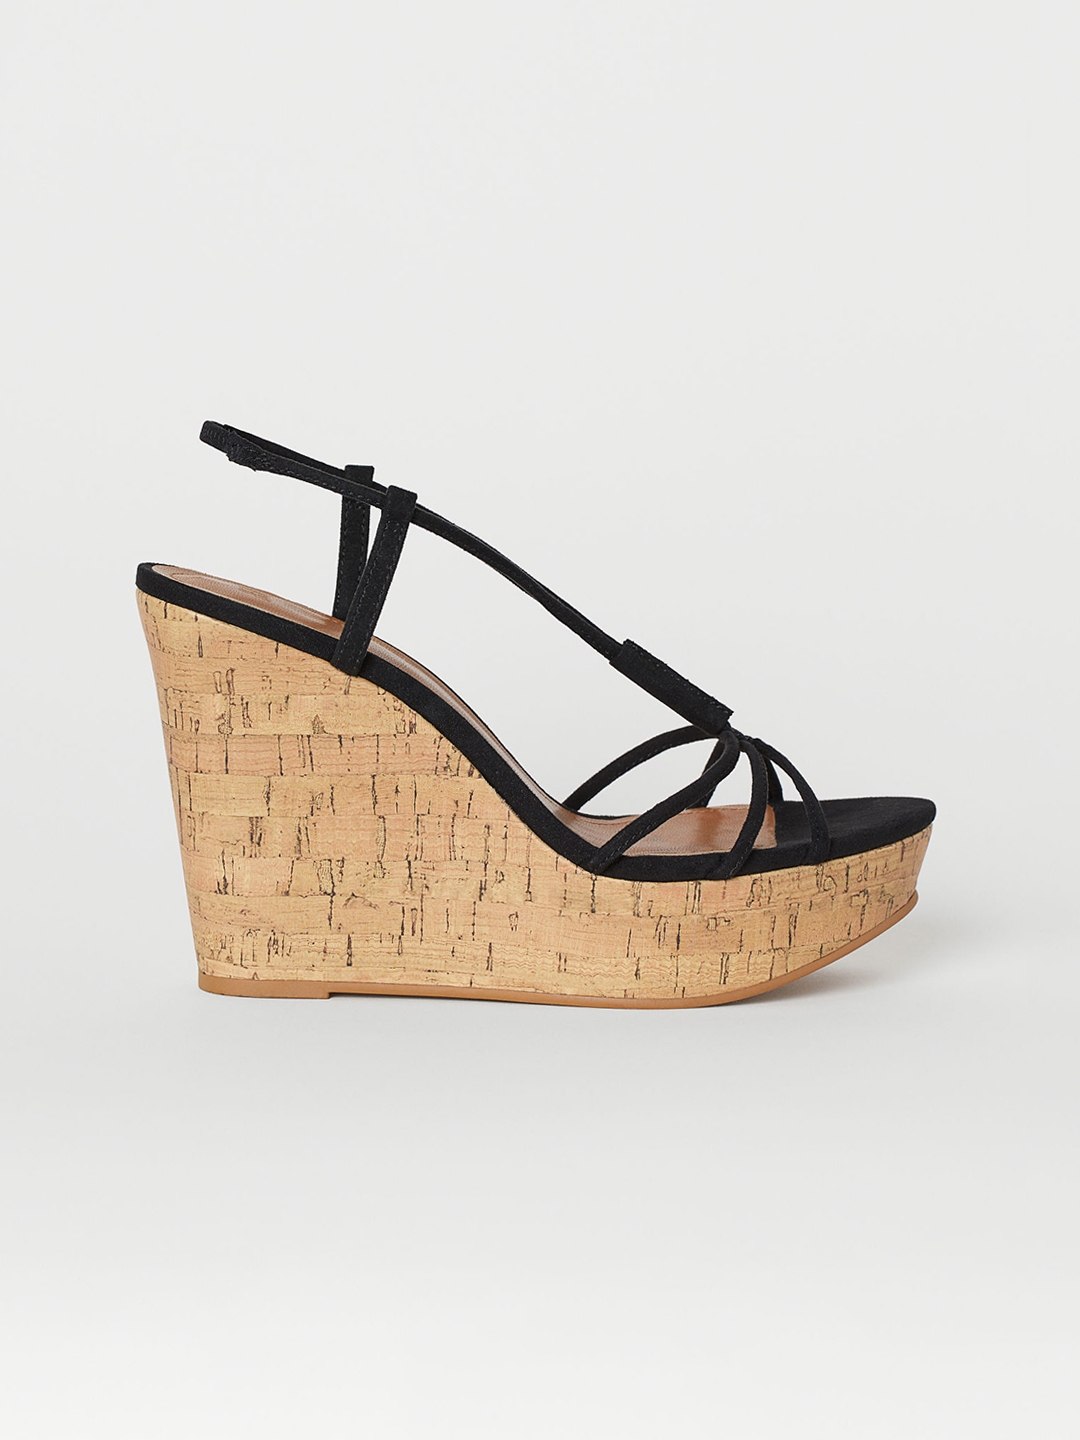 h&m wedges on sale